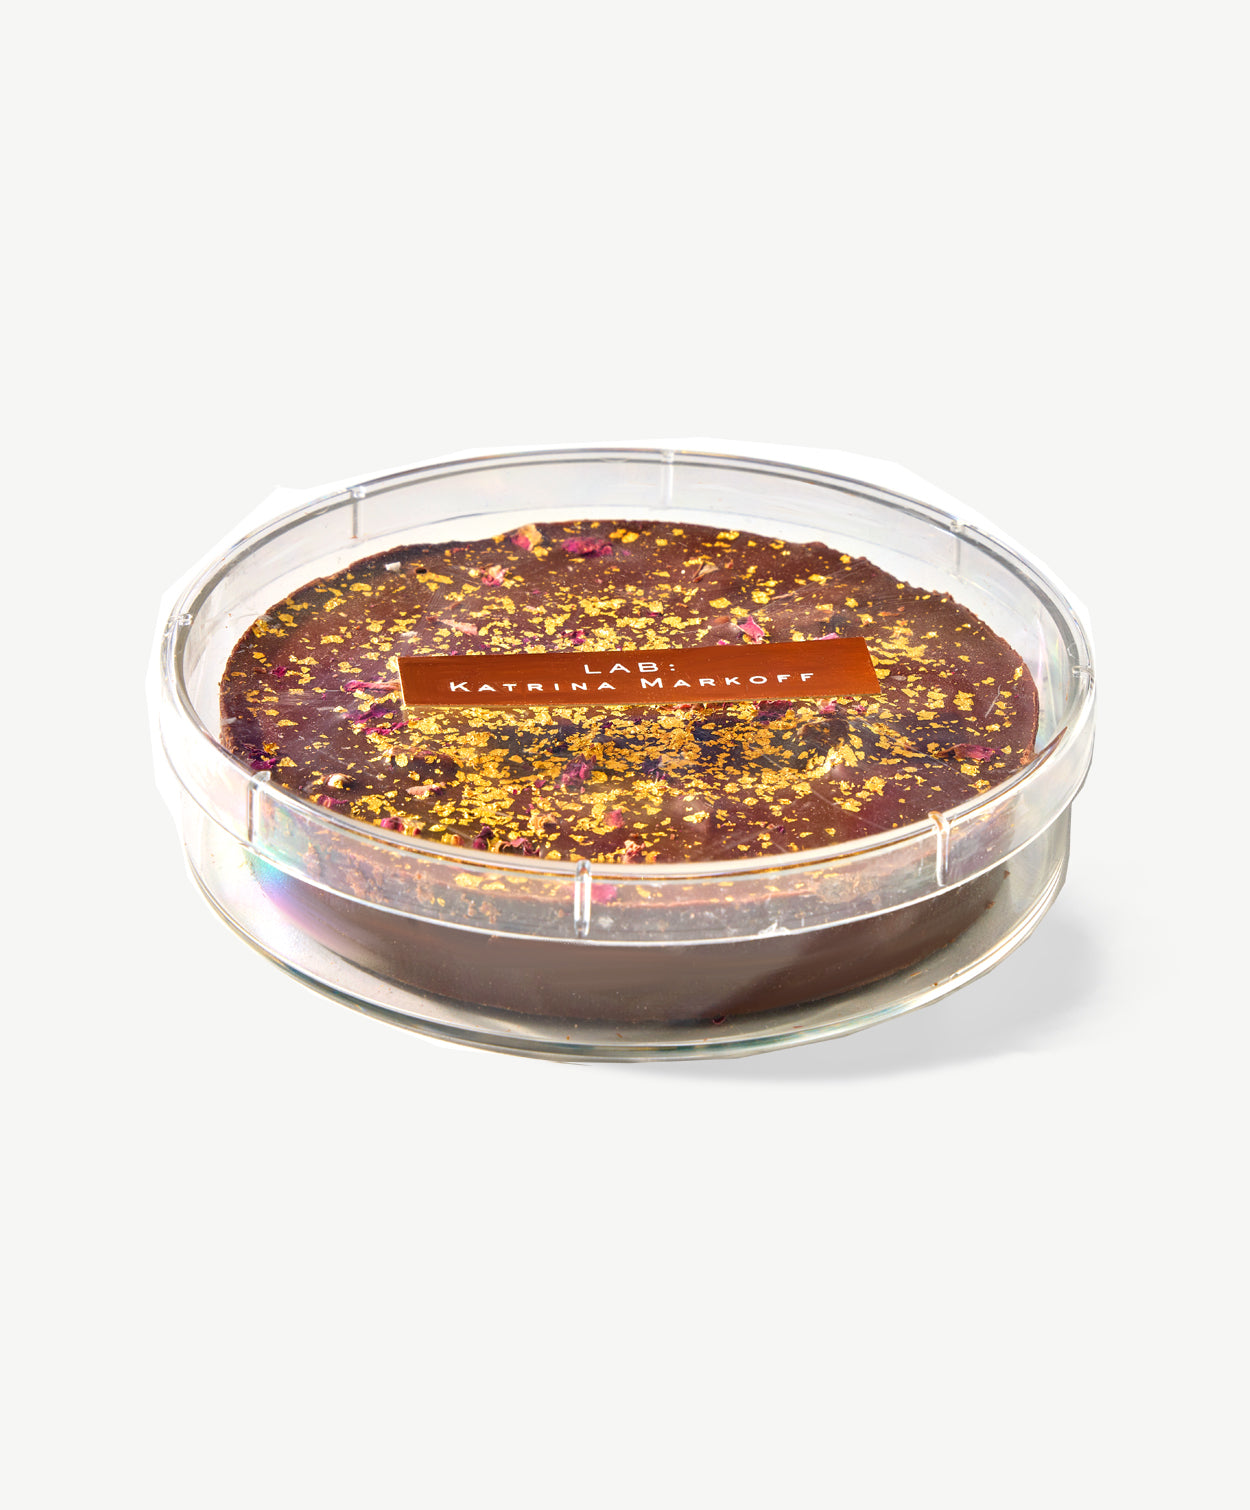 A large chocolate marshmallow disc adorned with gold leaf, pistachios and dried rose petals sit's in a clear case labeled: Lab, Katrina Markoff on a white background. 